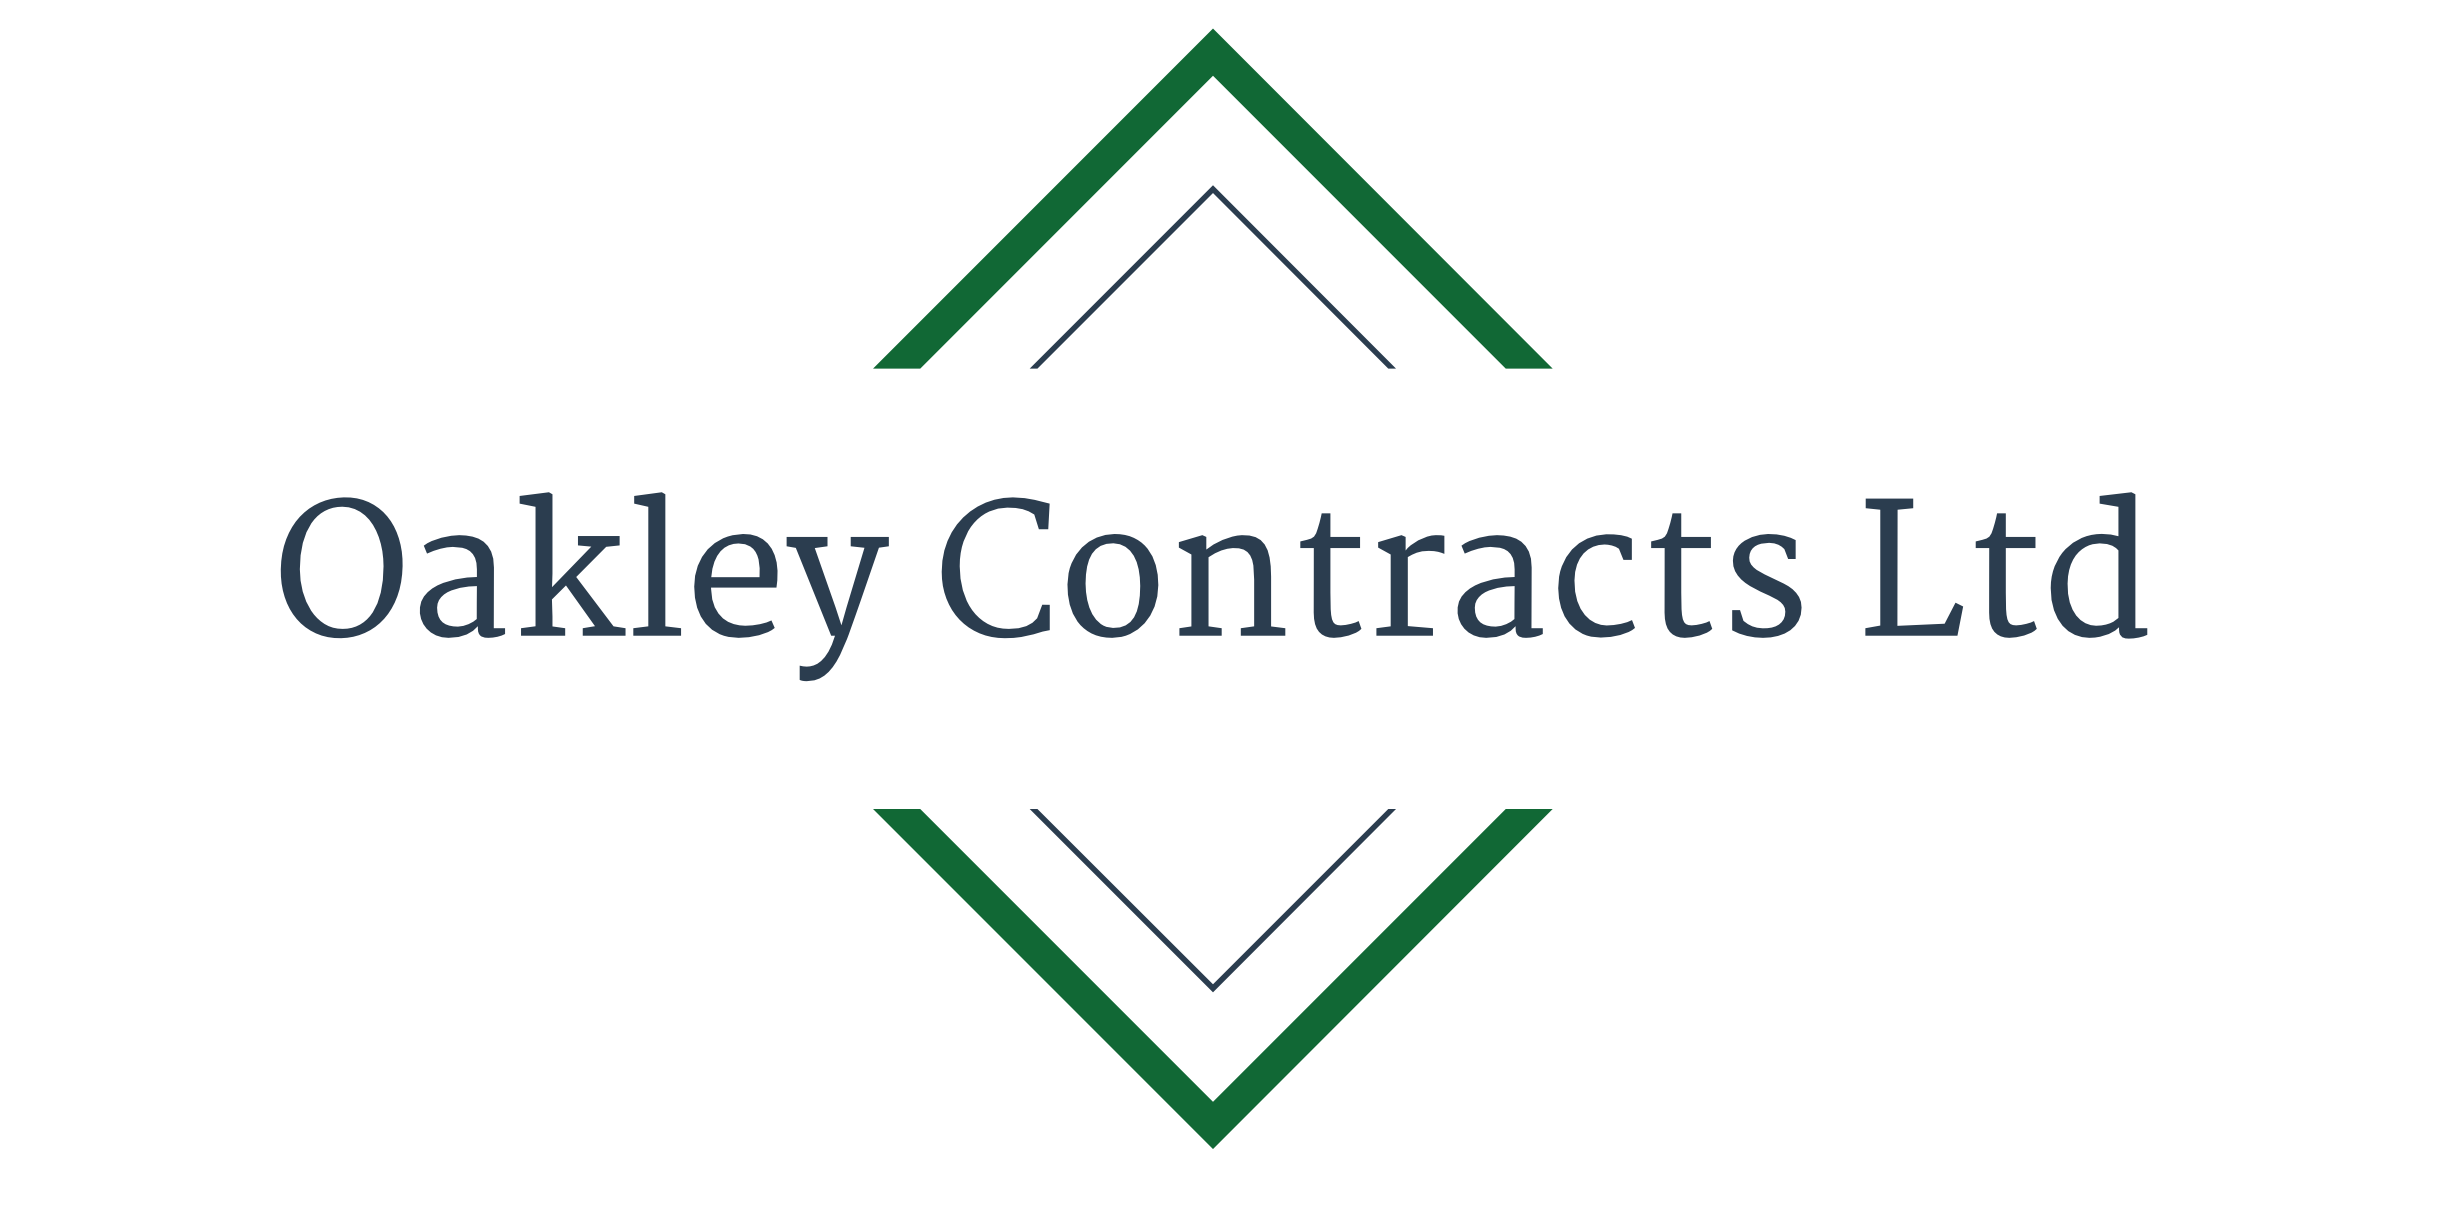 Oakley Contracts